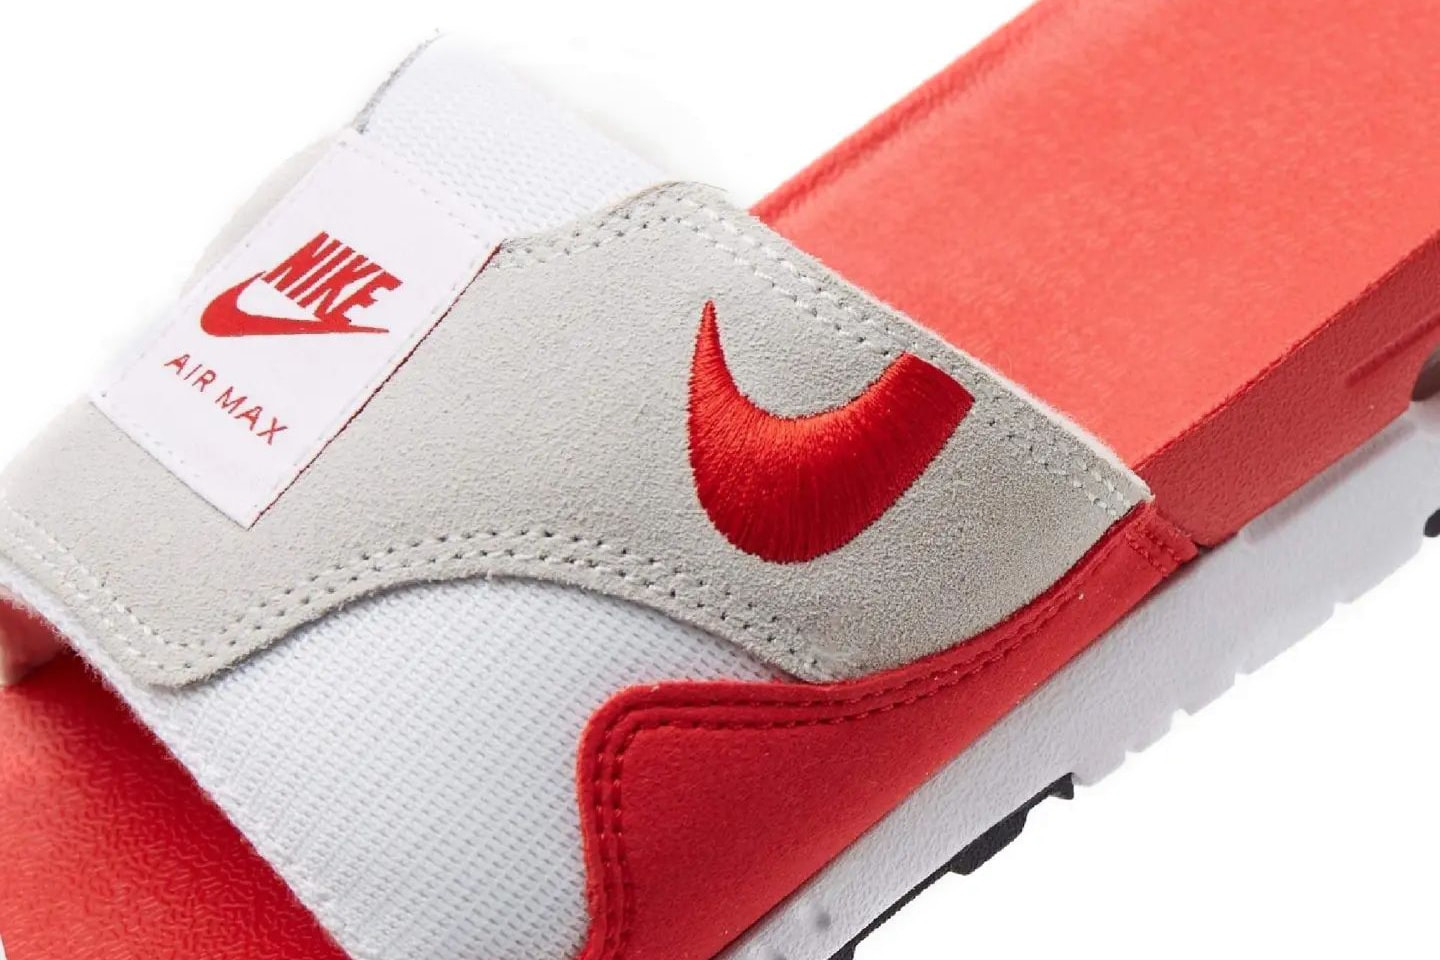 Nike Air Max 1 Slide Sport Red Reveal Release Info slide am1 air max day date store list buying guide photos price